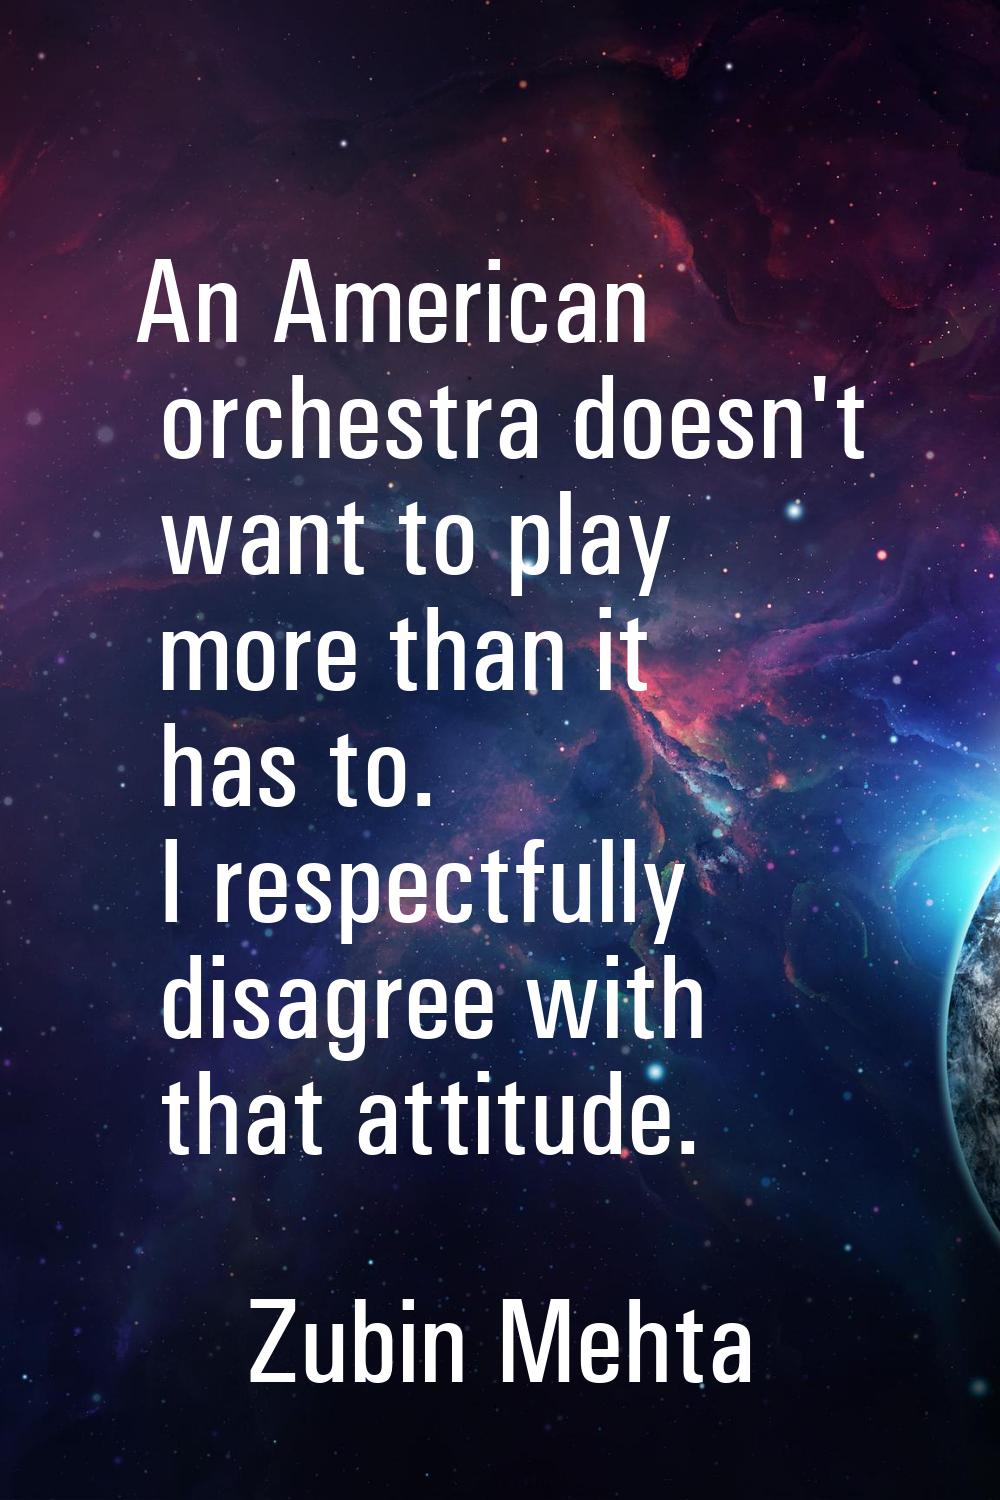 An American orchestra doesn't want to play more than it has to. I respectfully disagree with that a